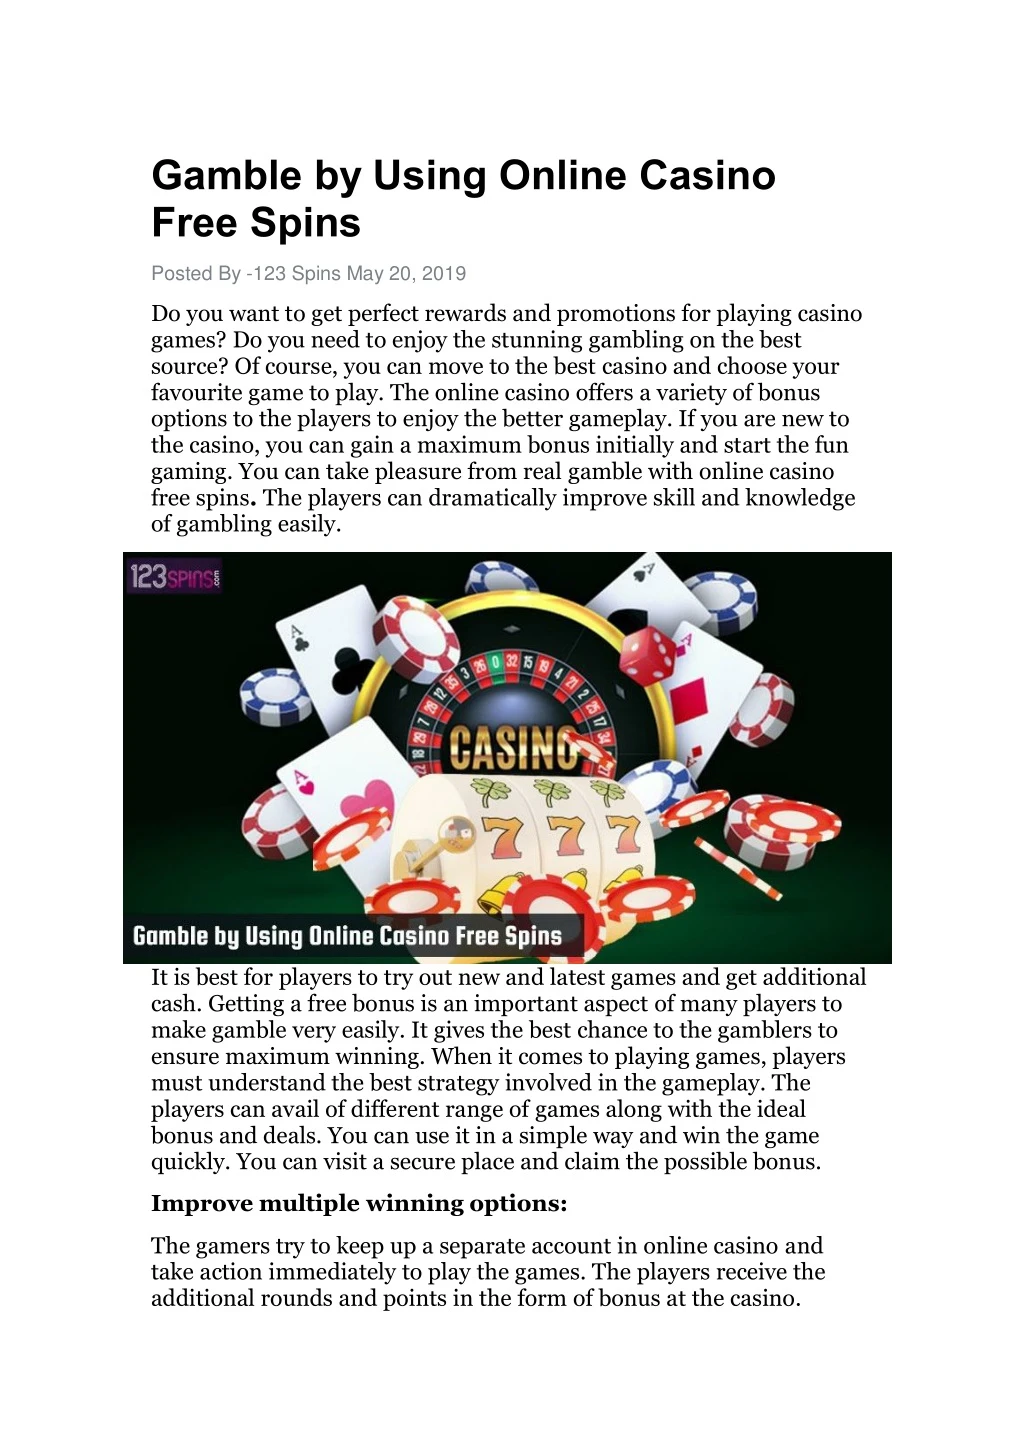 gamble by using online casino free spins